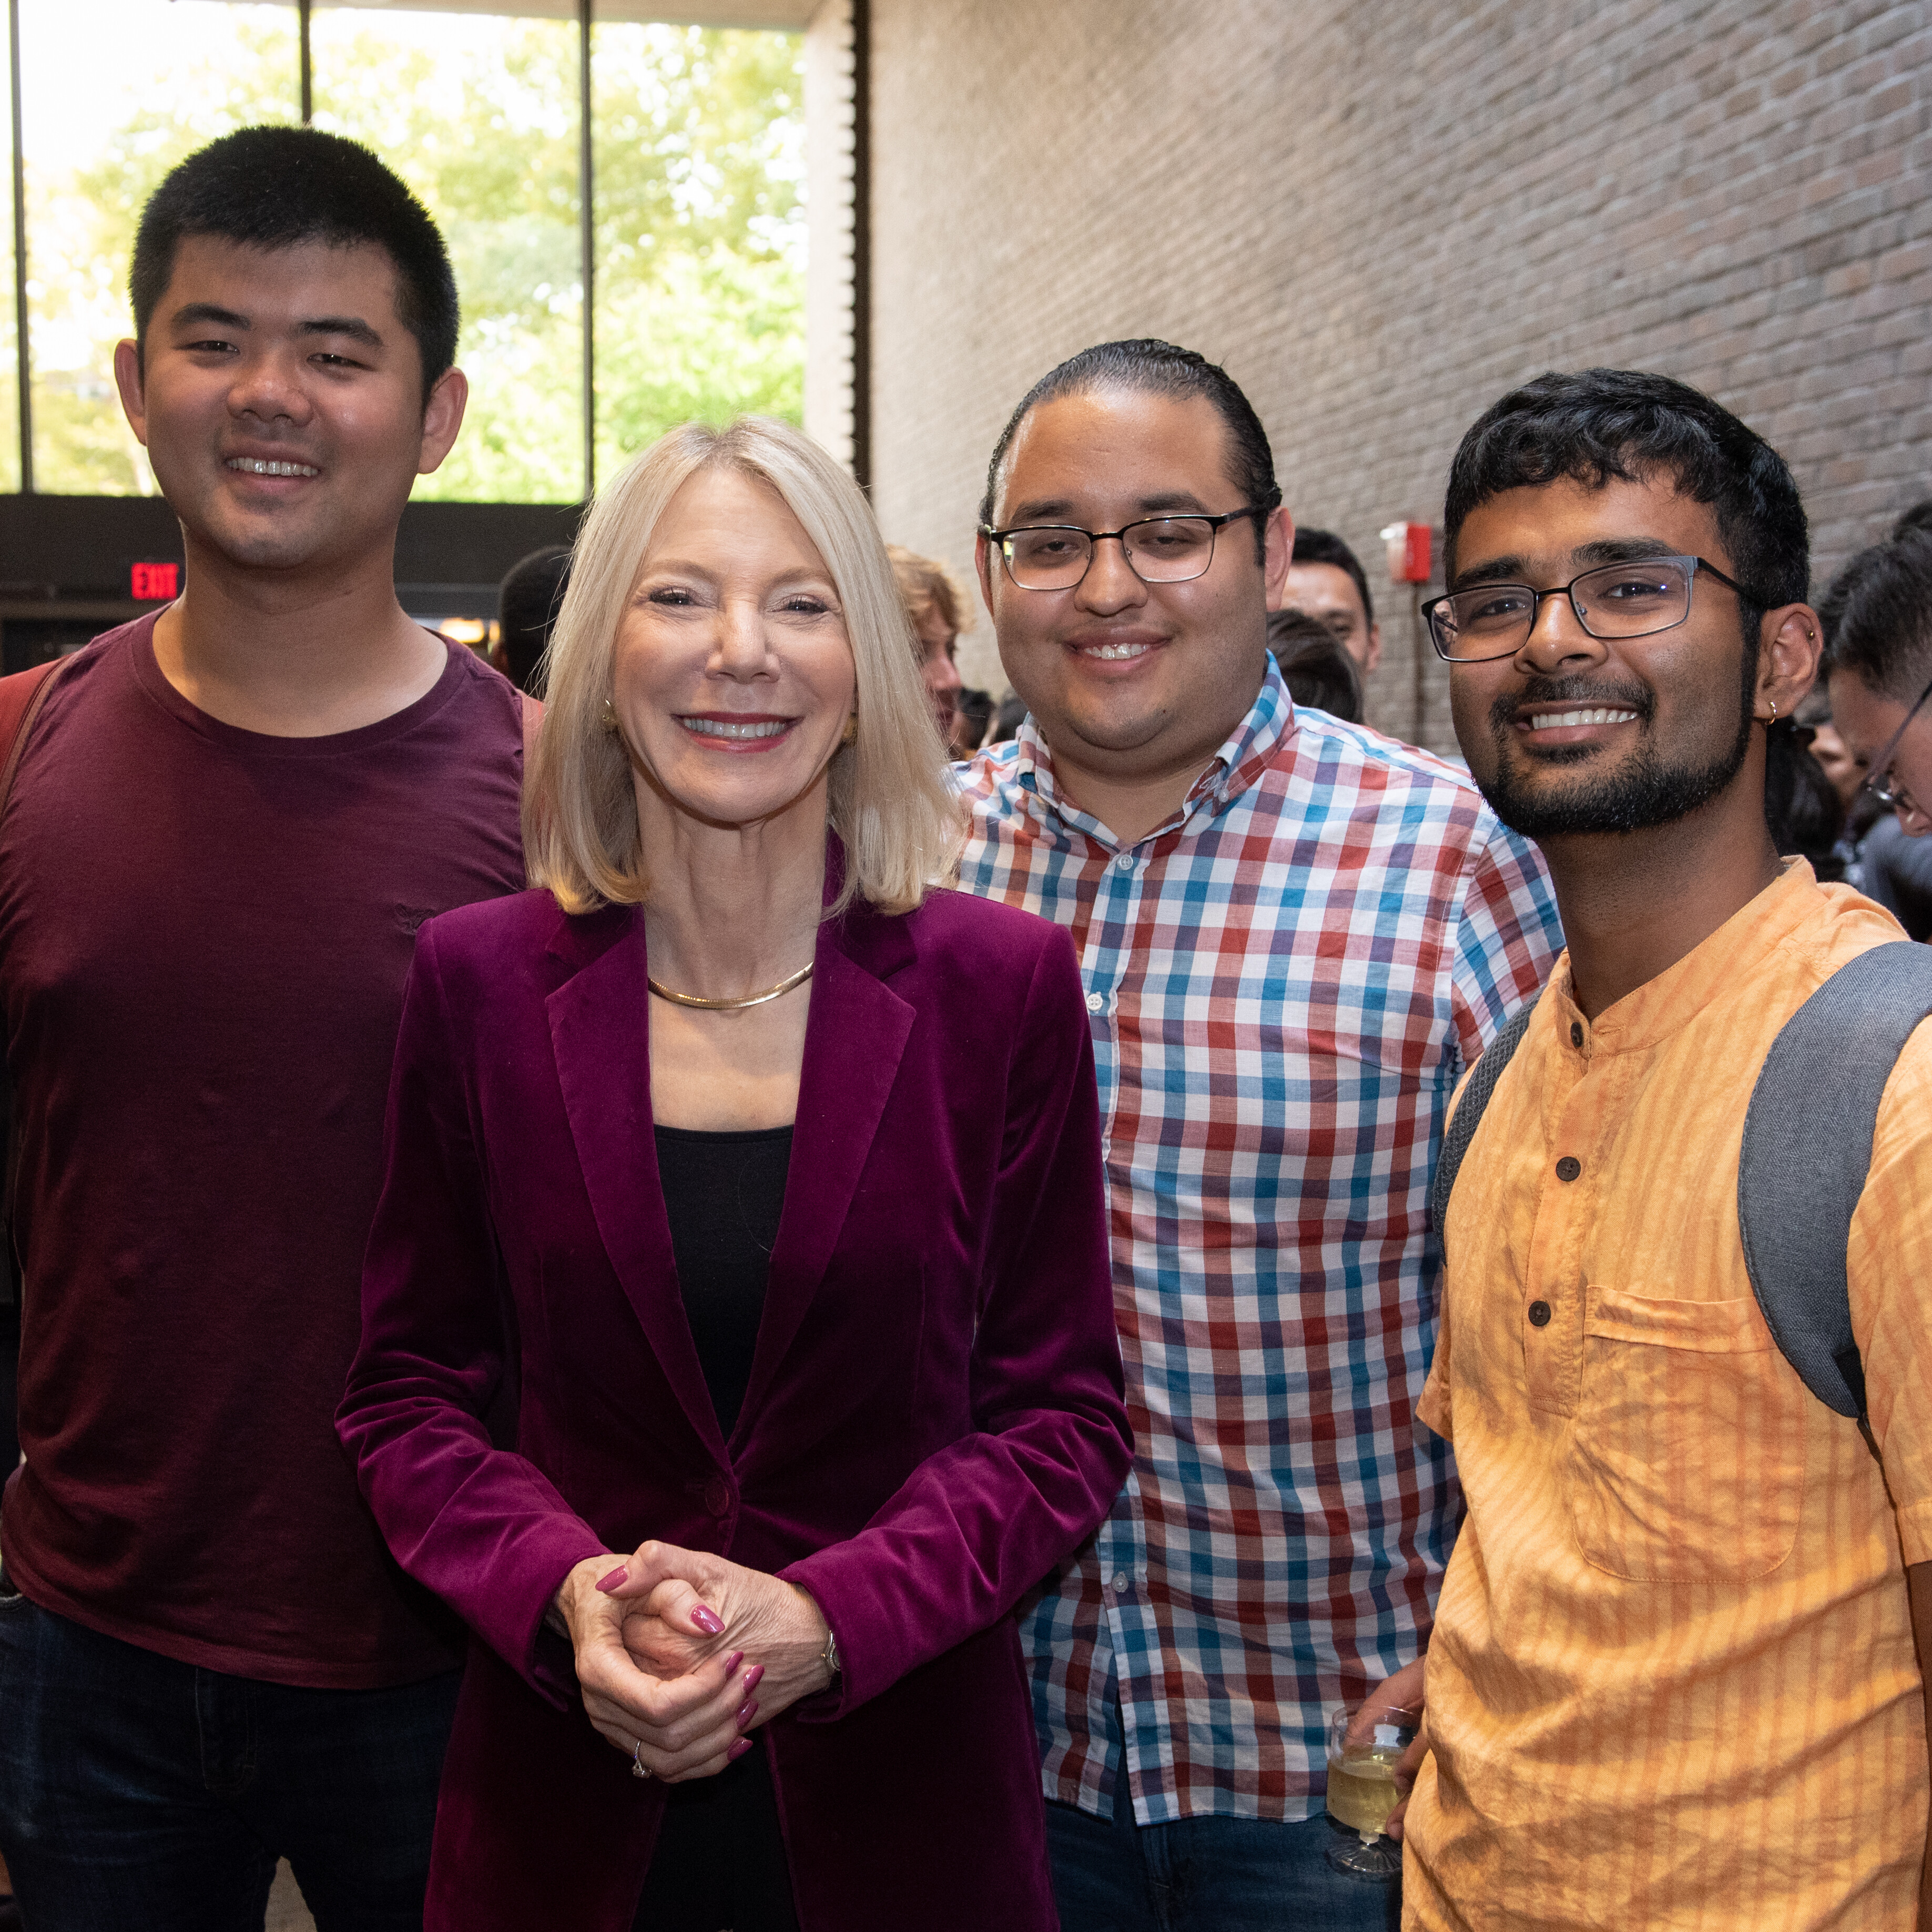 Amy Gutmann, Penn President, New Graduate and Professional Student Welcome 2019